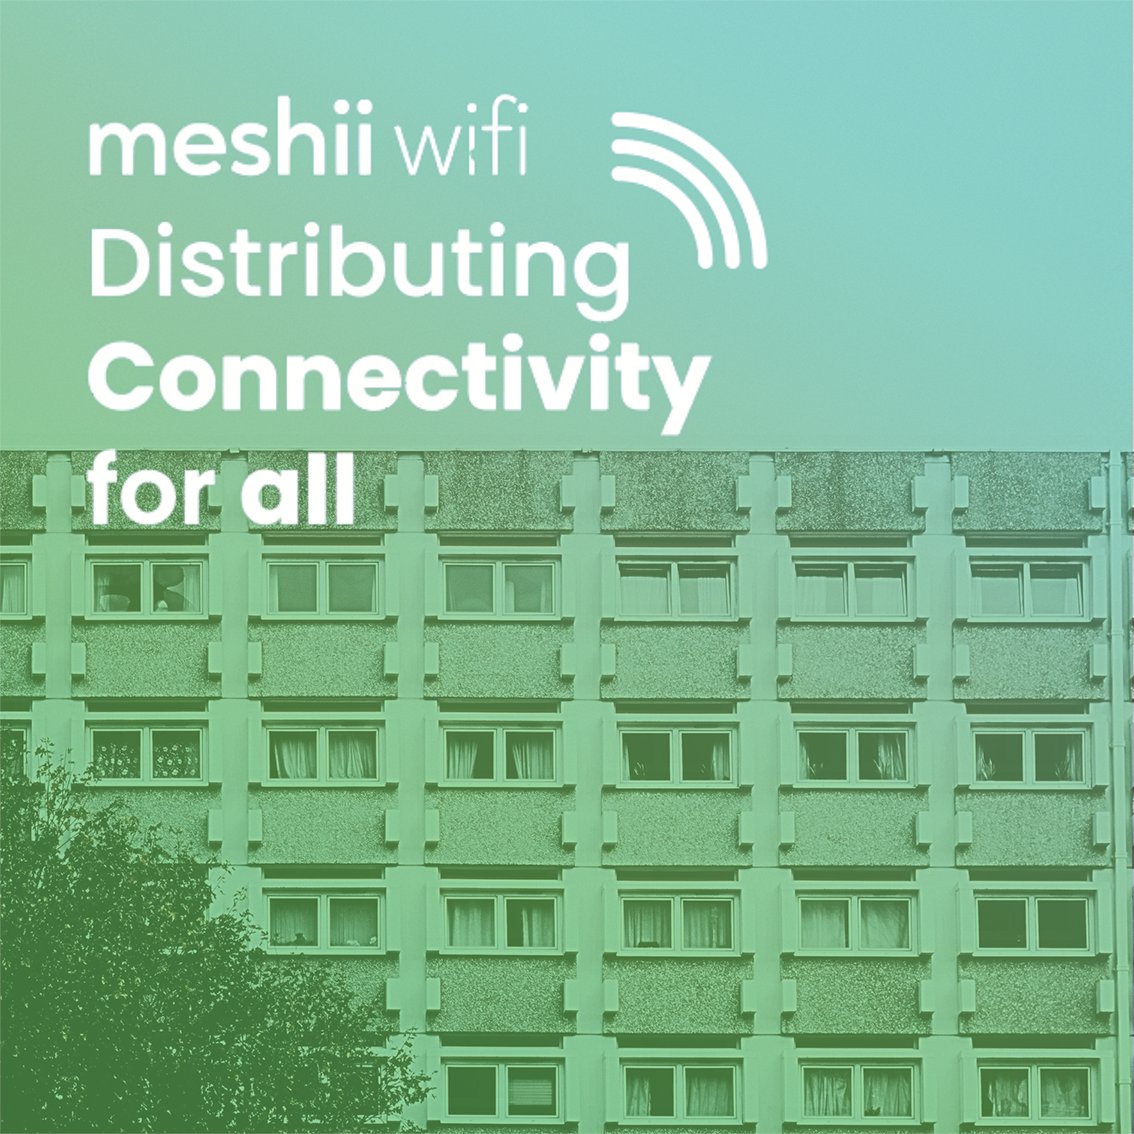 There are more than 16k Multiple Dwelling Units (MDUs) in the #UK. Most #MDUs are constructed using concrete, which can hinder #connectivity. Meshii wifi is collaborating with #housingassociations and #localauthorities to provide hubs to improve connectivity for #residents.